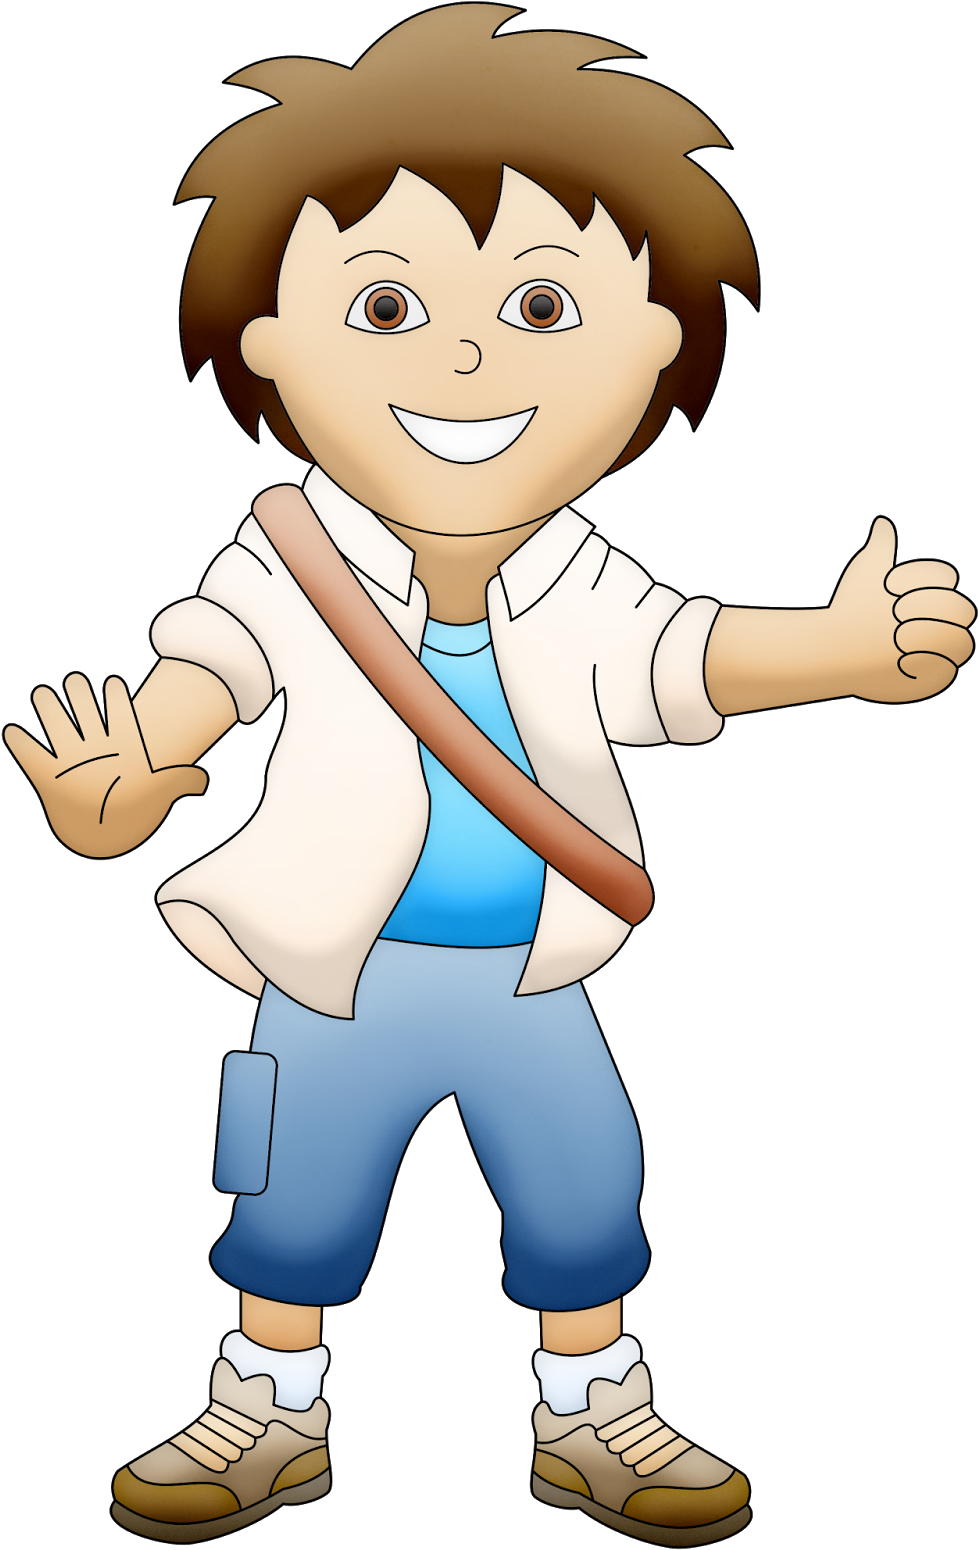 Animated Boy Character Thumbs Up PNG